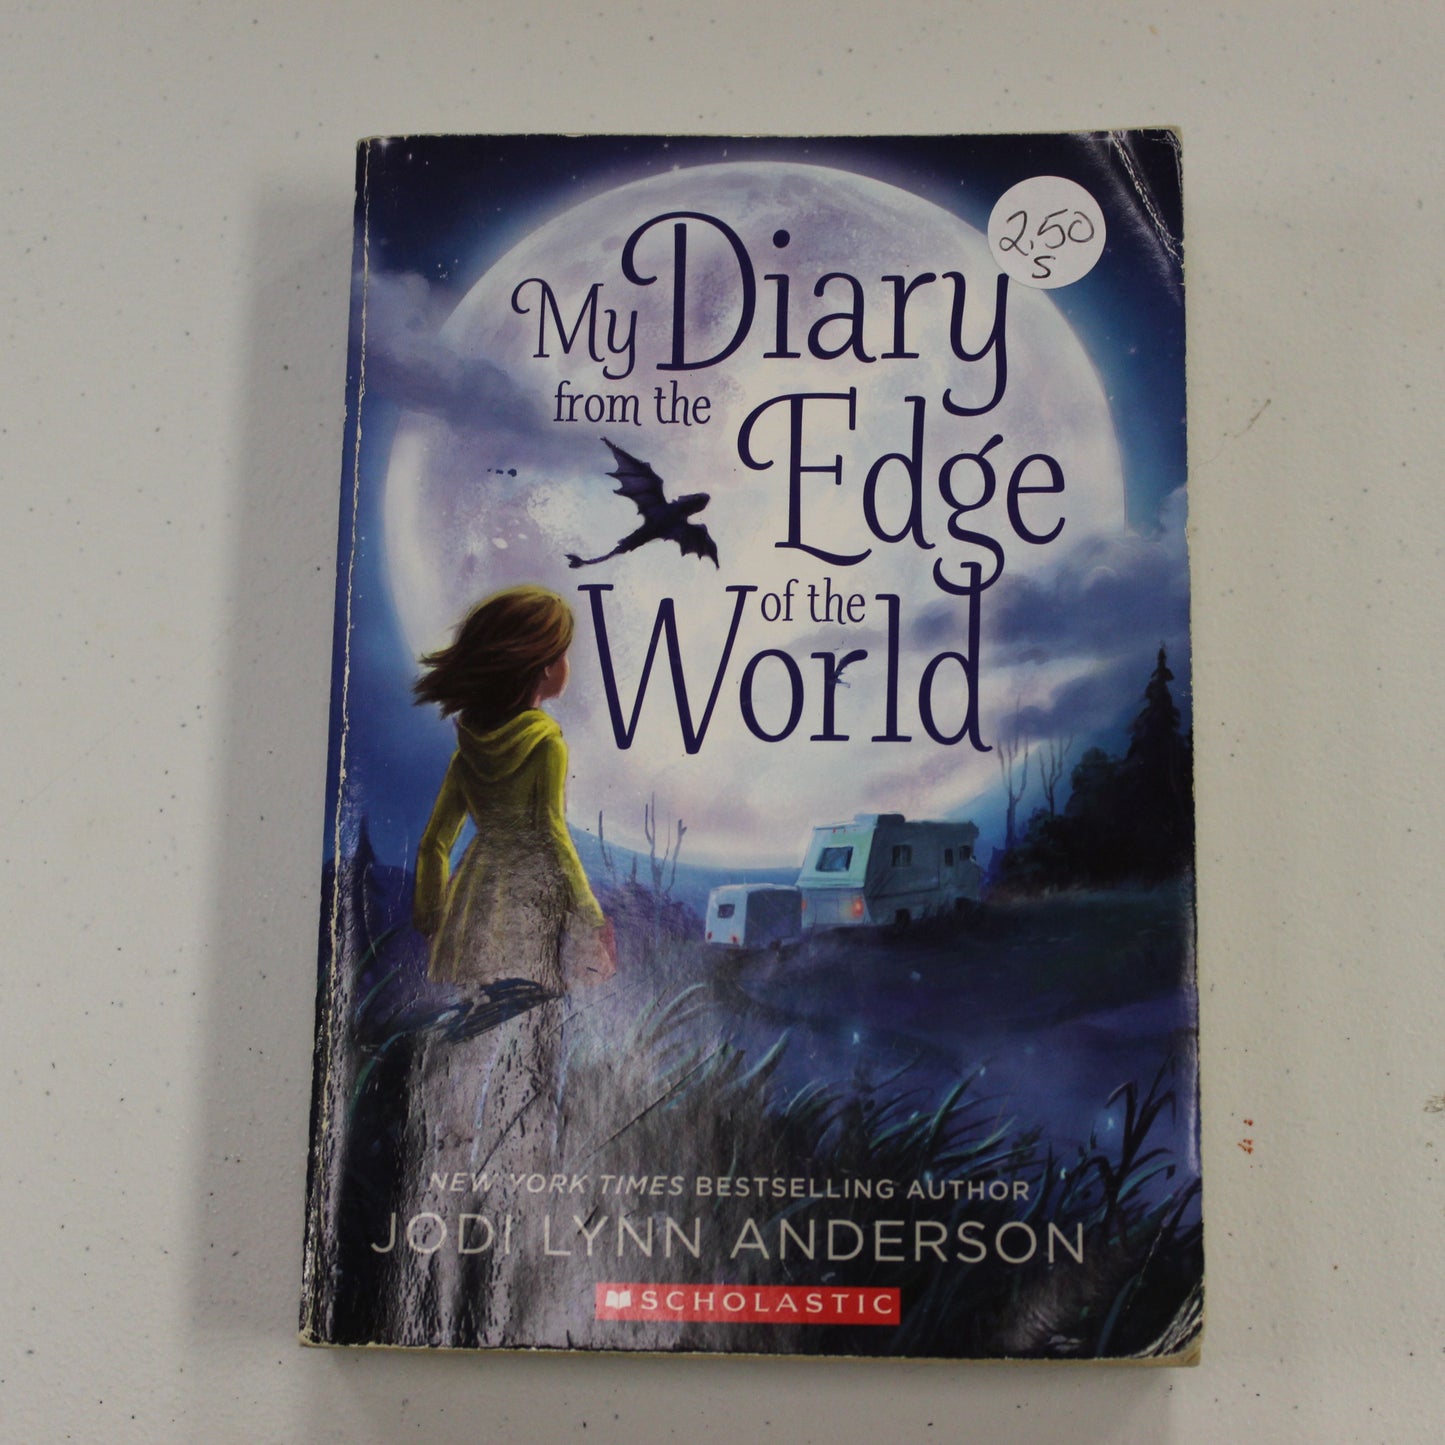 MY DIARY FROM THE EDGE OF THE WORLD